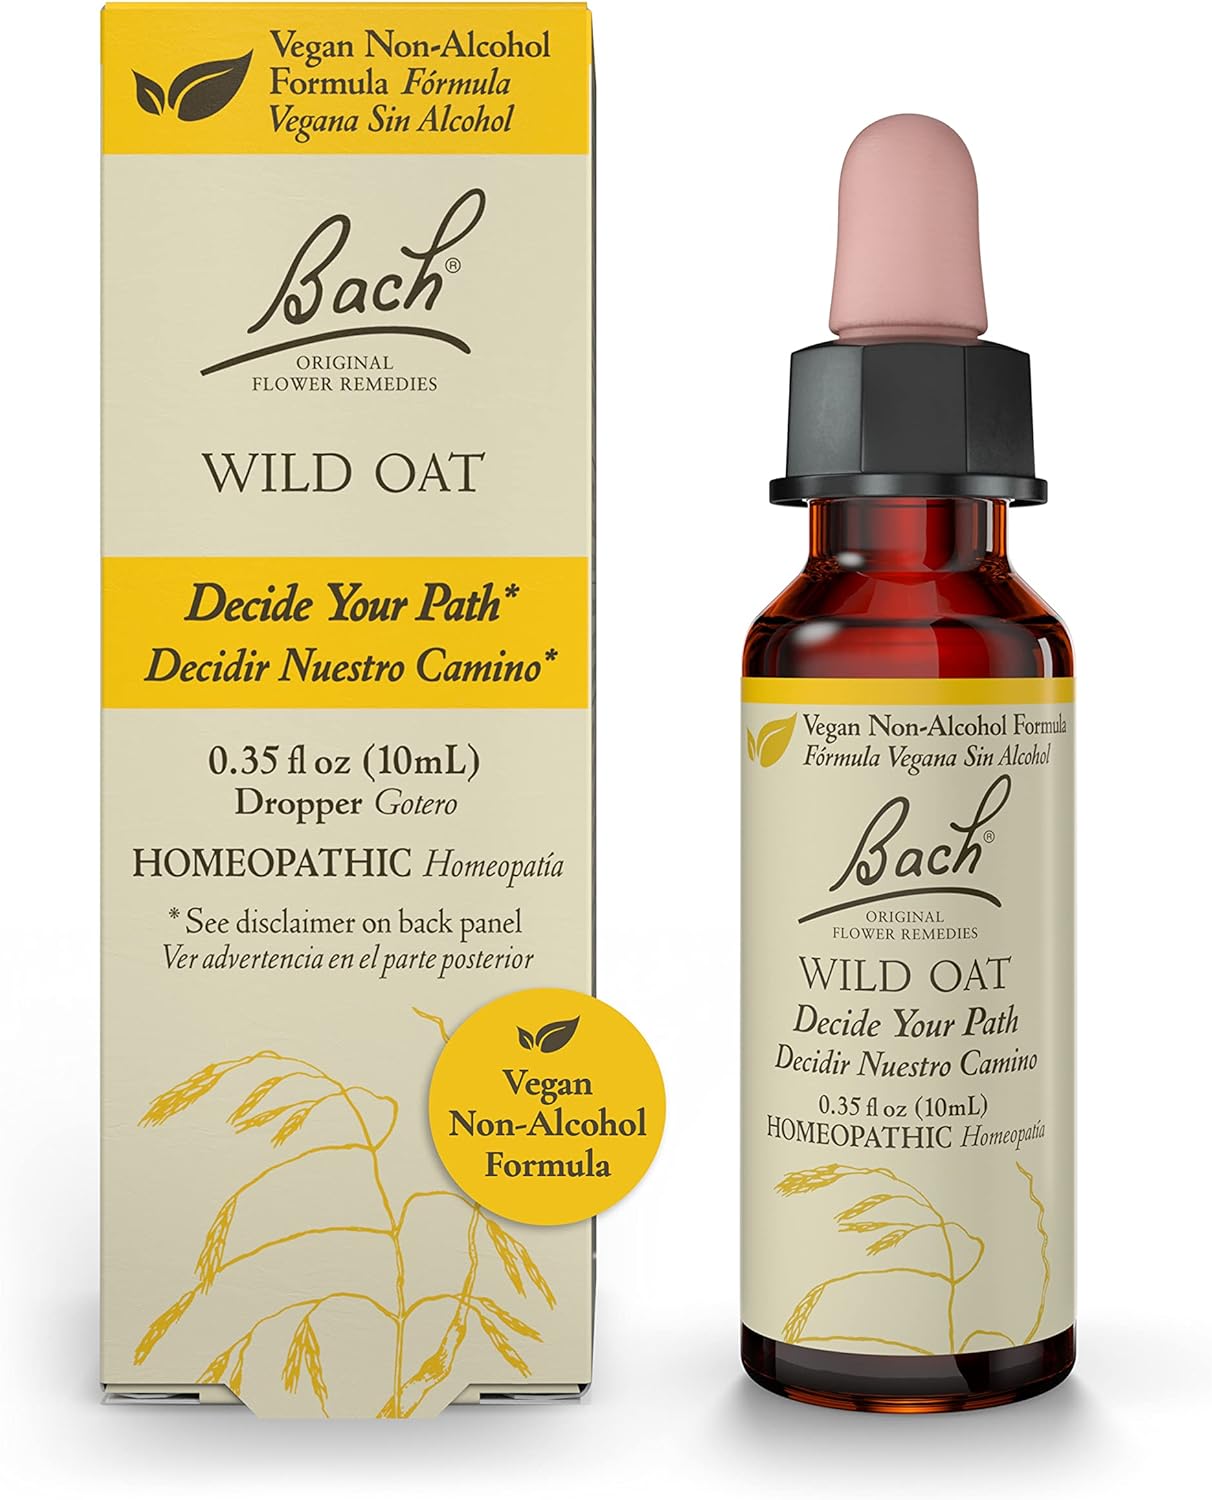 Bach Original Flower Remedies, Wild Oat for Deciding Life's Path (Non-Alcohol Formula), Natural Homeopathic Flower Essence, Holistic Wellness and Stress Relief, Vegan, 10mL Dropper